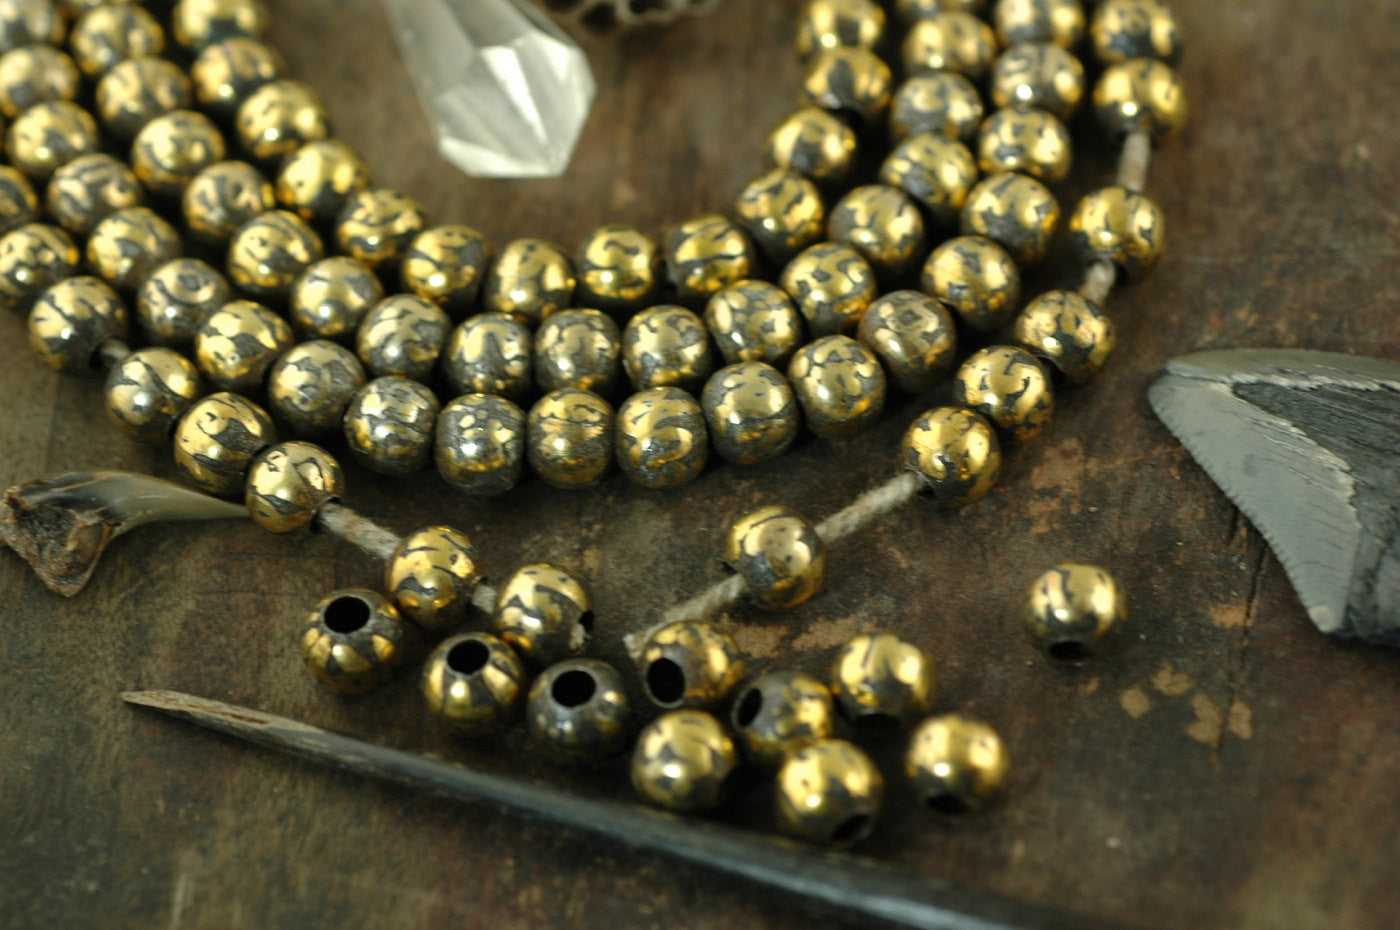 Bits of Sparkle: 10 Loose Brass, Copper Golden Hollow 8mm Beads